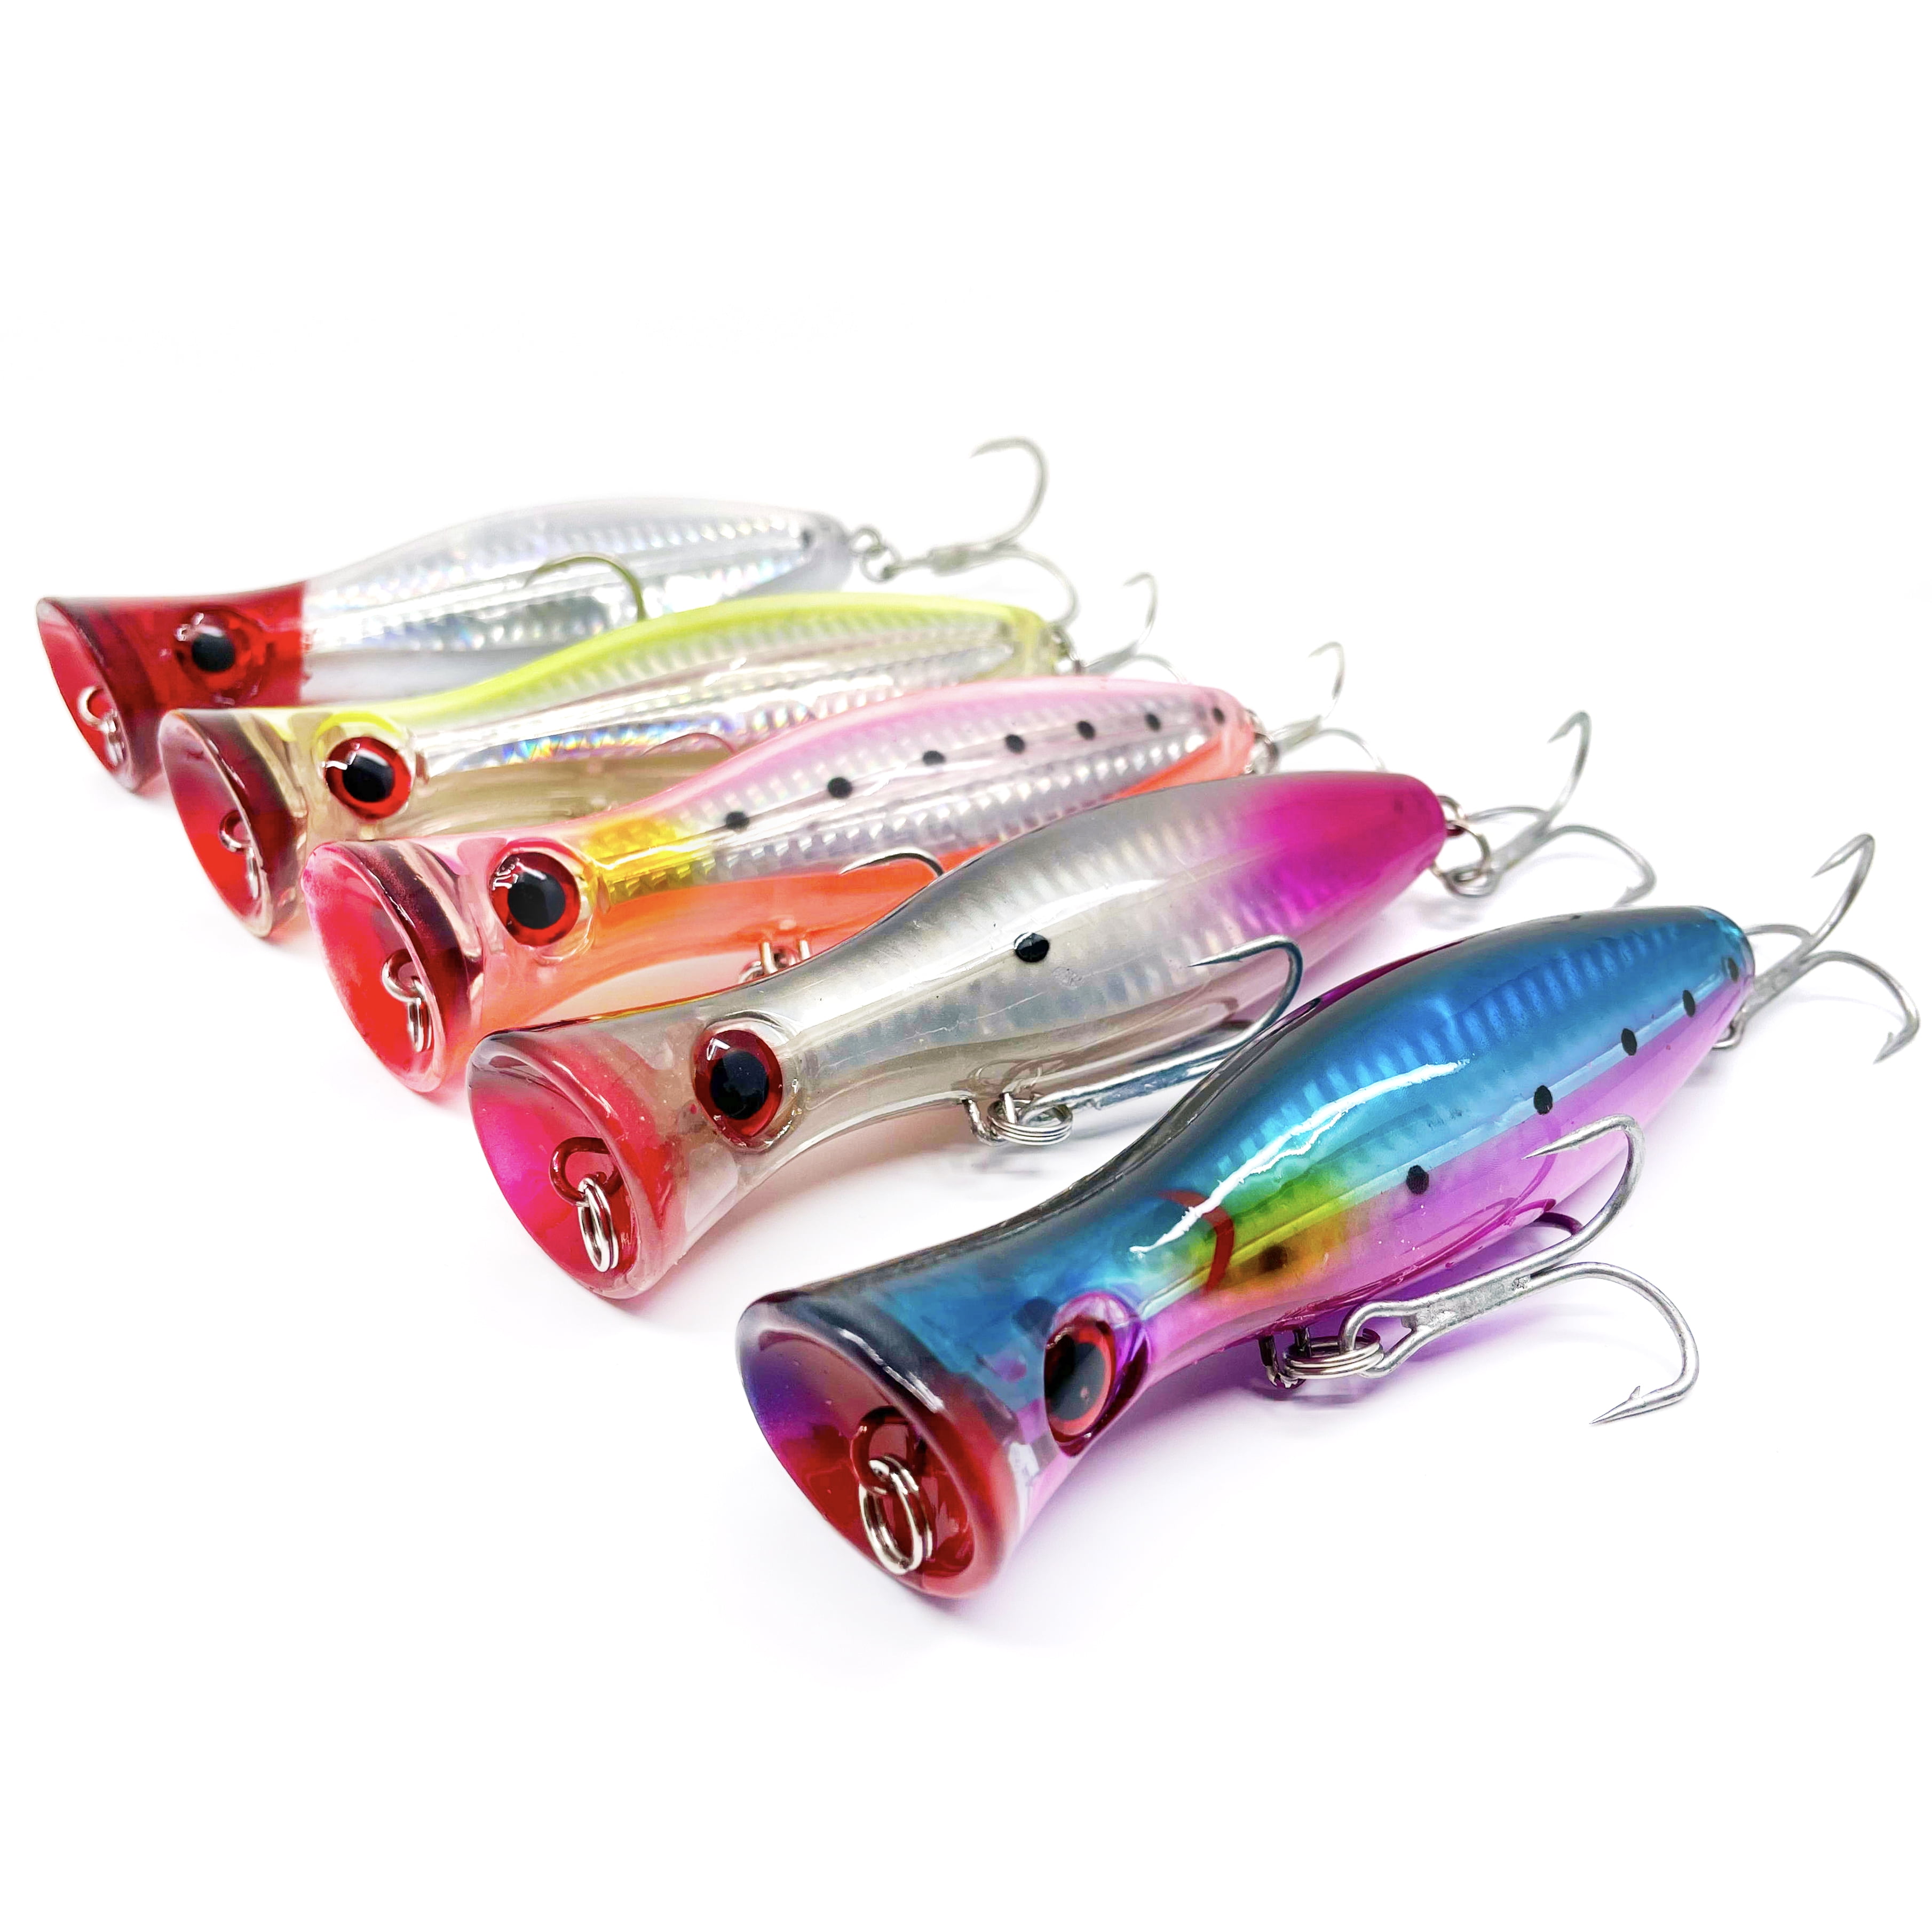 Large Fishing Popper Lure Saltwater Fishing Lure 5 Inches Bass Bait Lure 5  Inches 